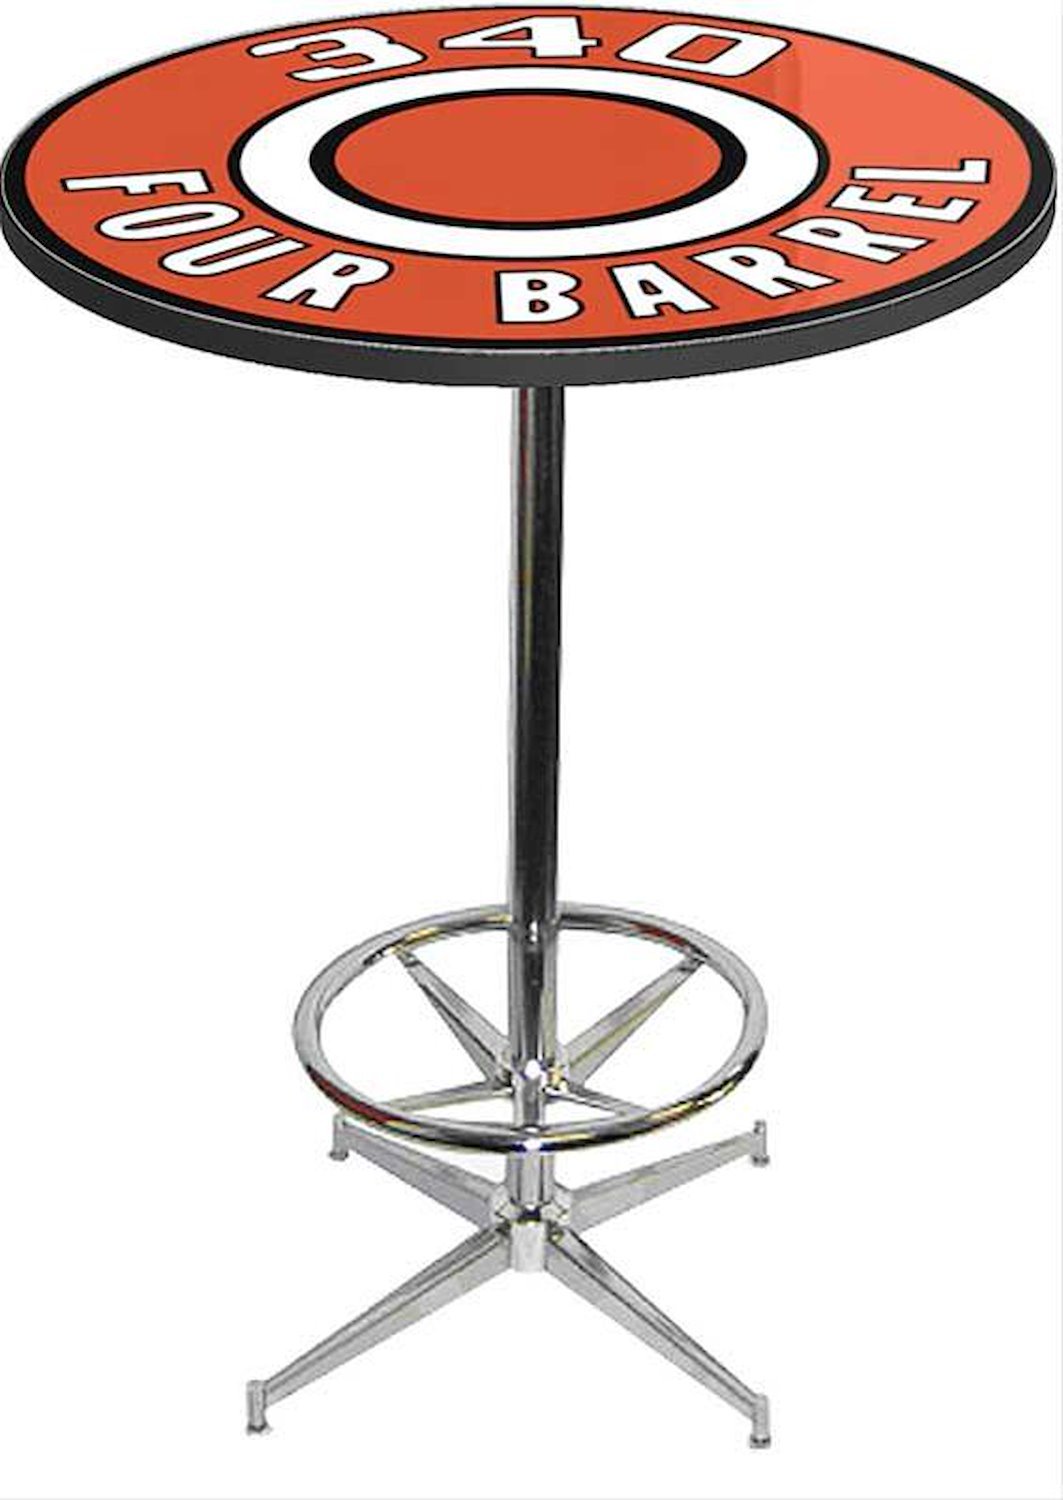 MD673110 Pub Table With Chrome Base And Foot Rest Mopar 340 Four Barrel Logo Pub Table With Chrome Base And Foot Rest